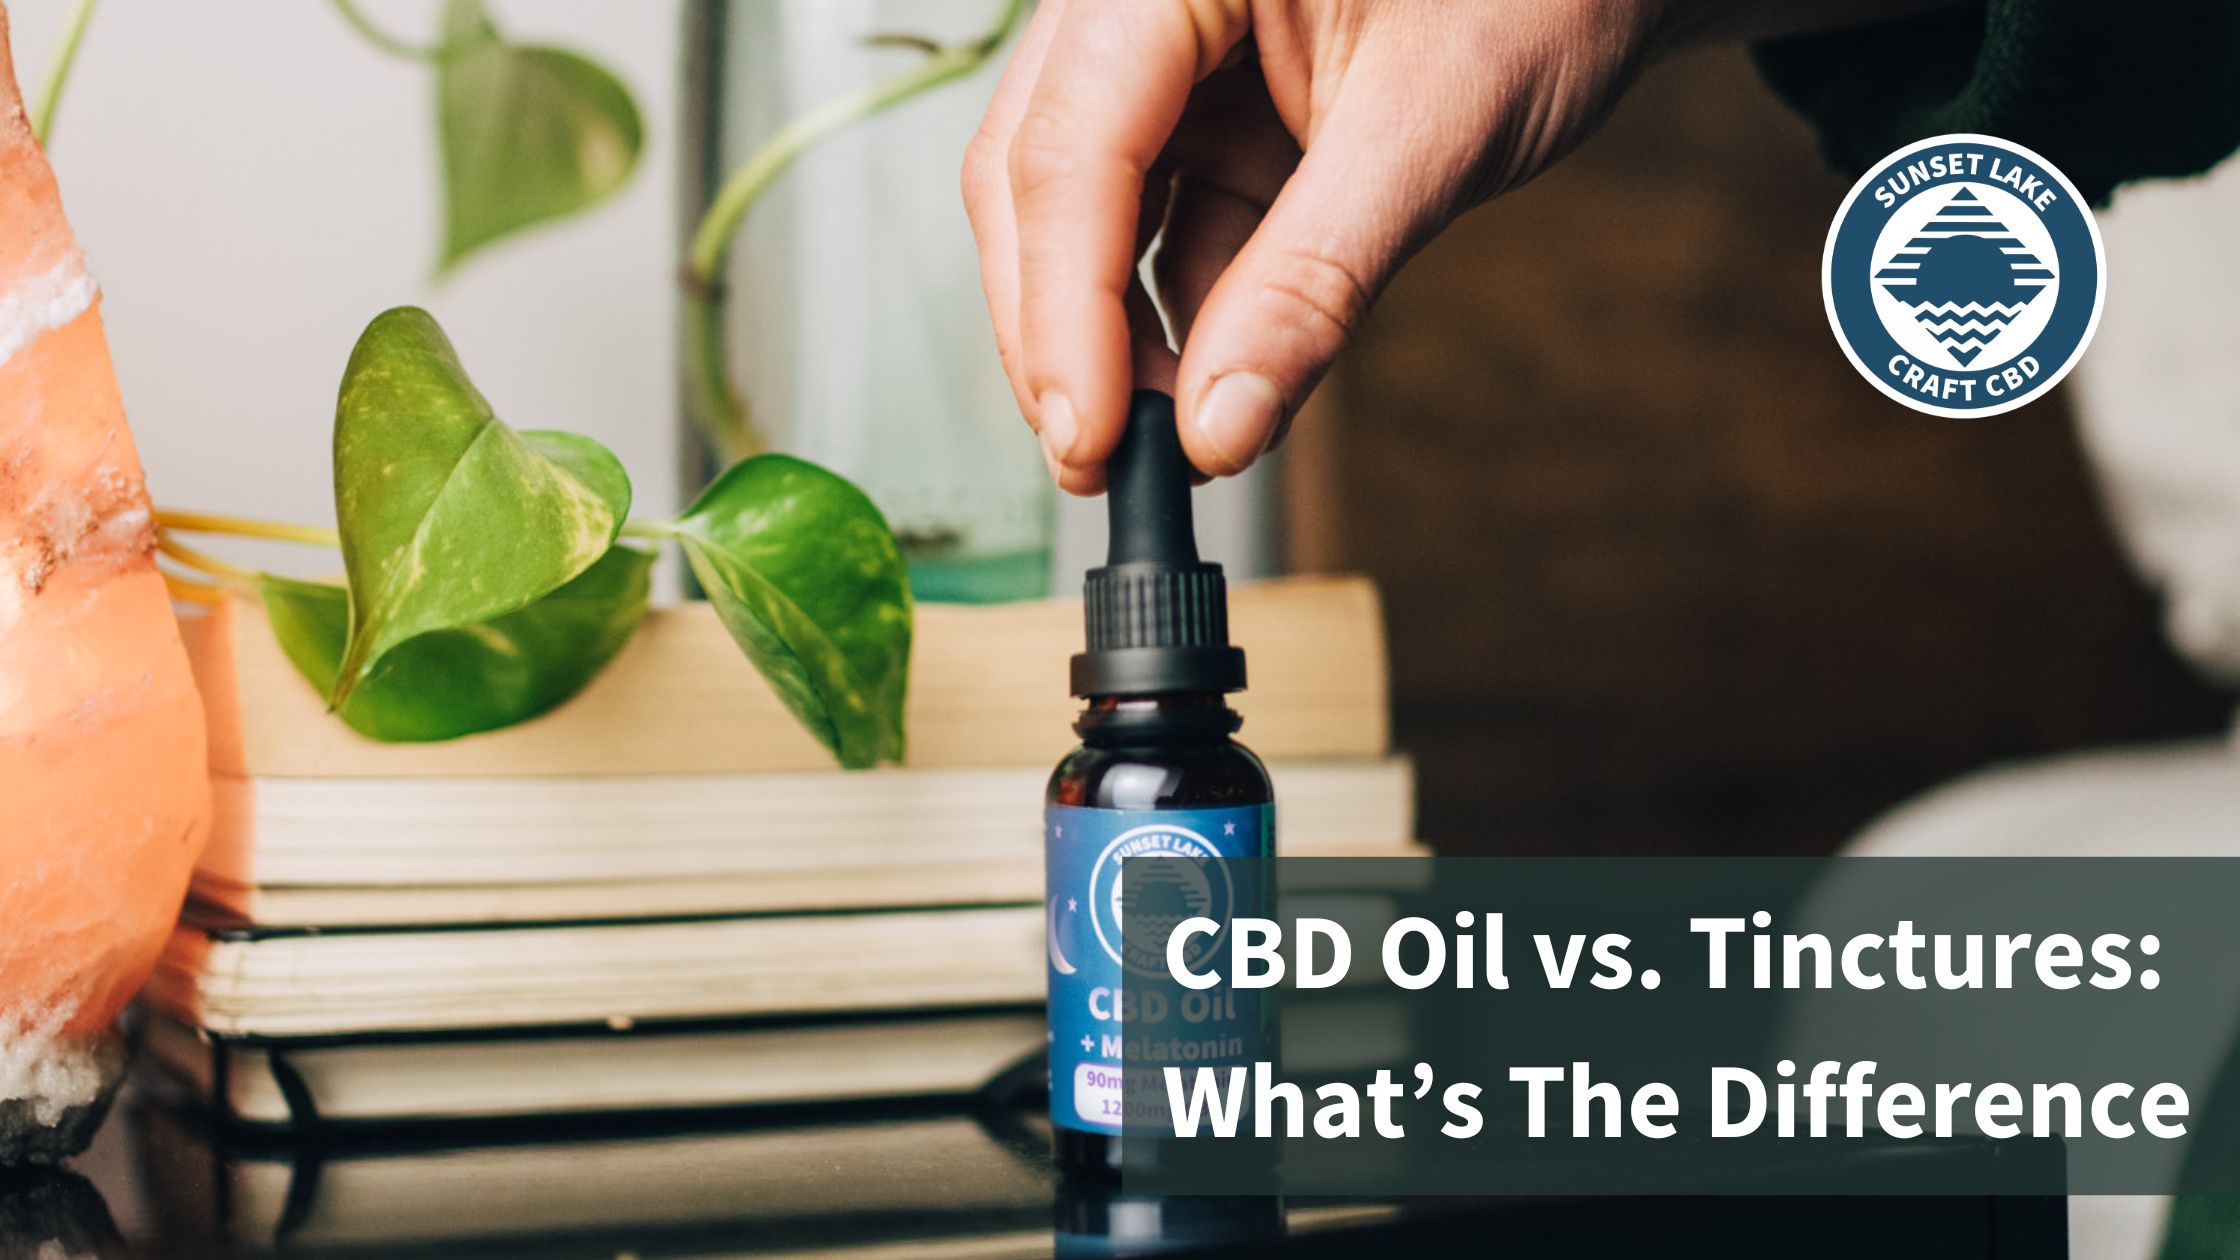 CBD Oil vs. Tinctures: What’s the Difference? | Sunset Lake CBD